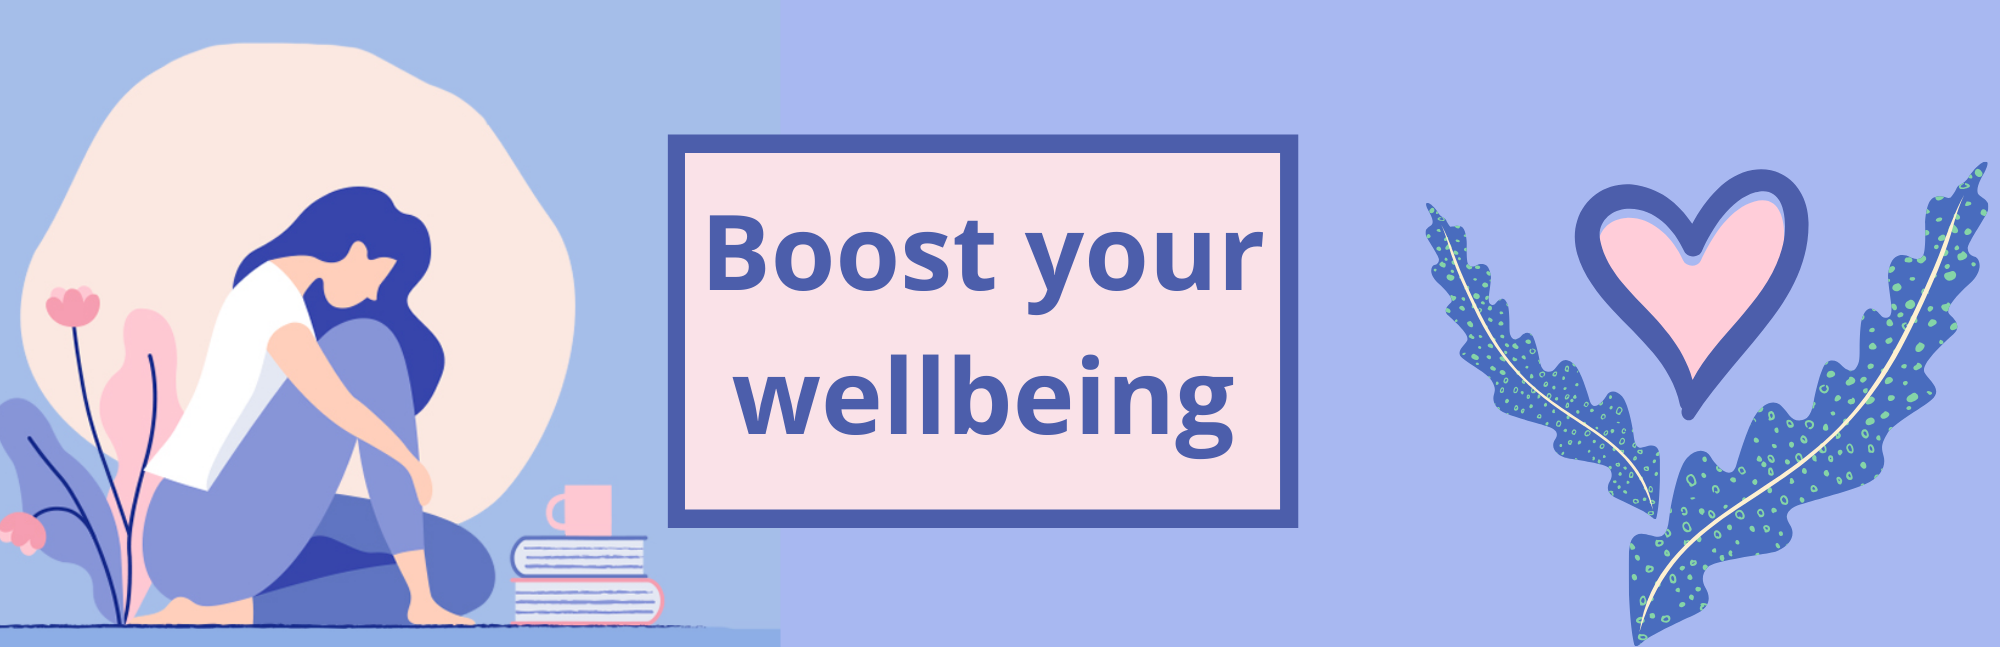 Boost your wellbeing